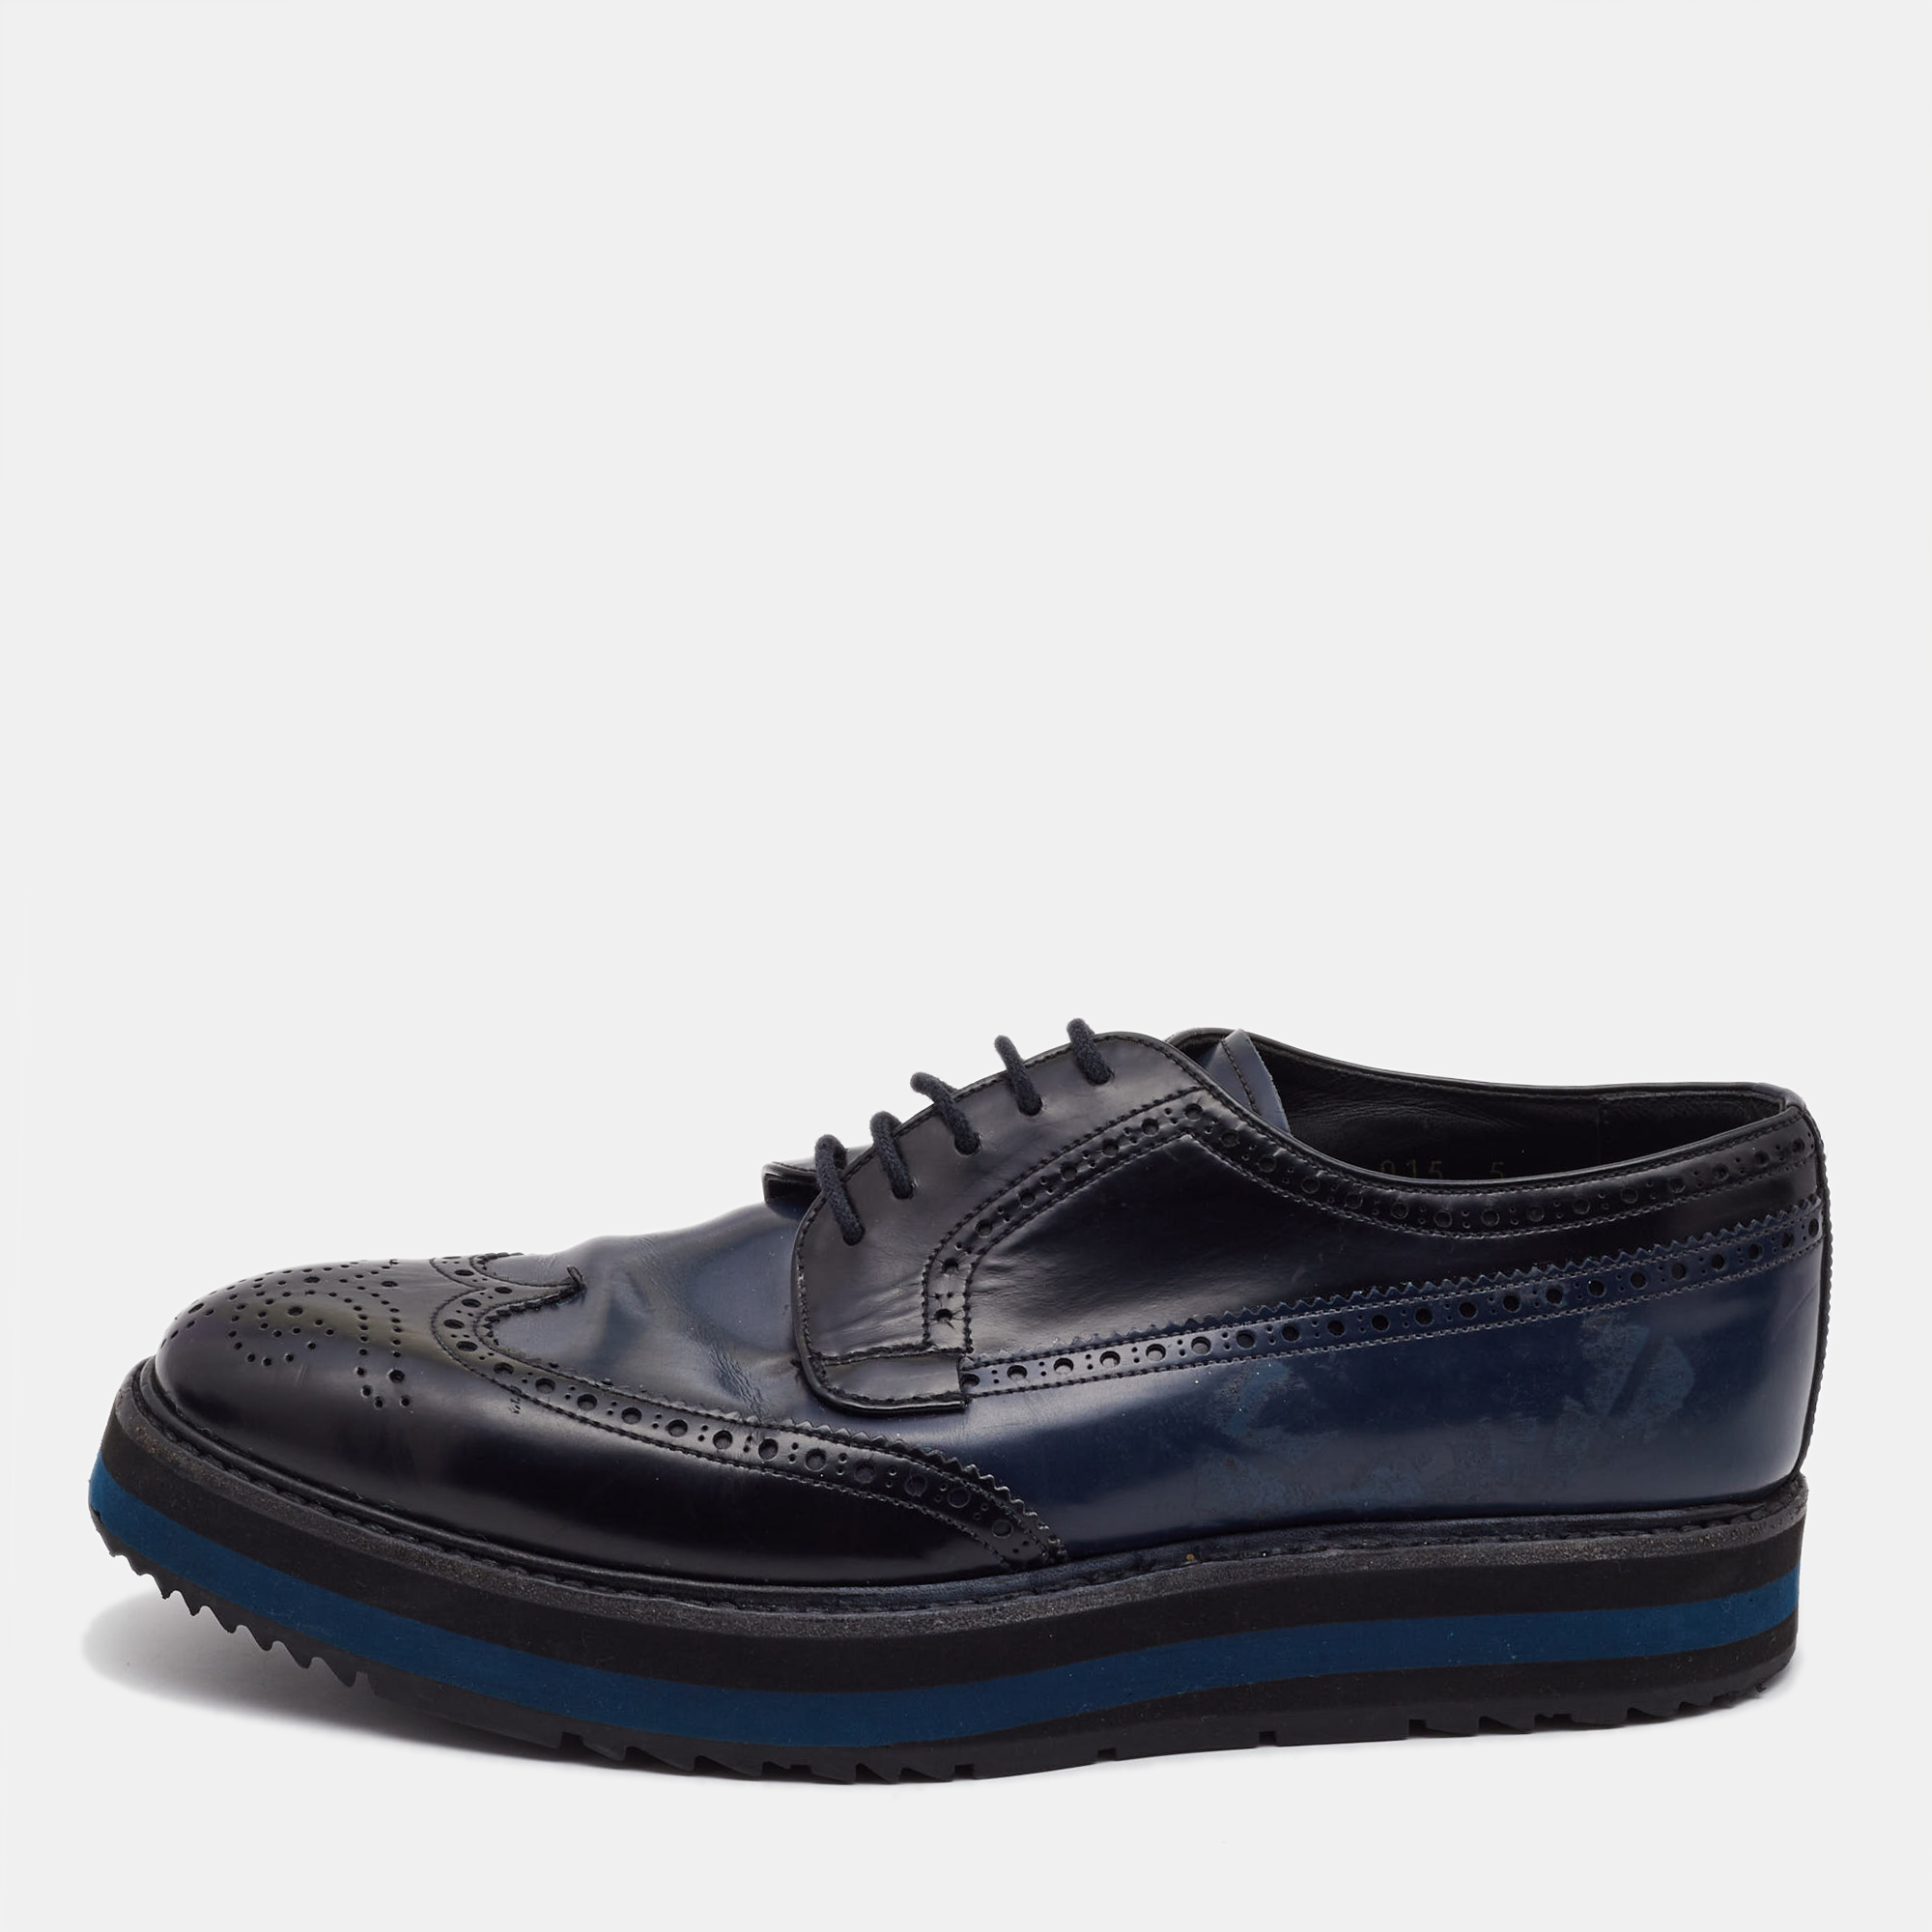 

Prada Black/Navy Blue Patent Leather Brogue Oxford Sneakers Size